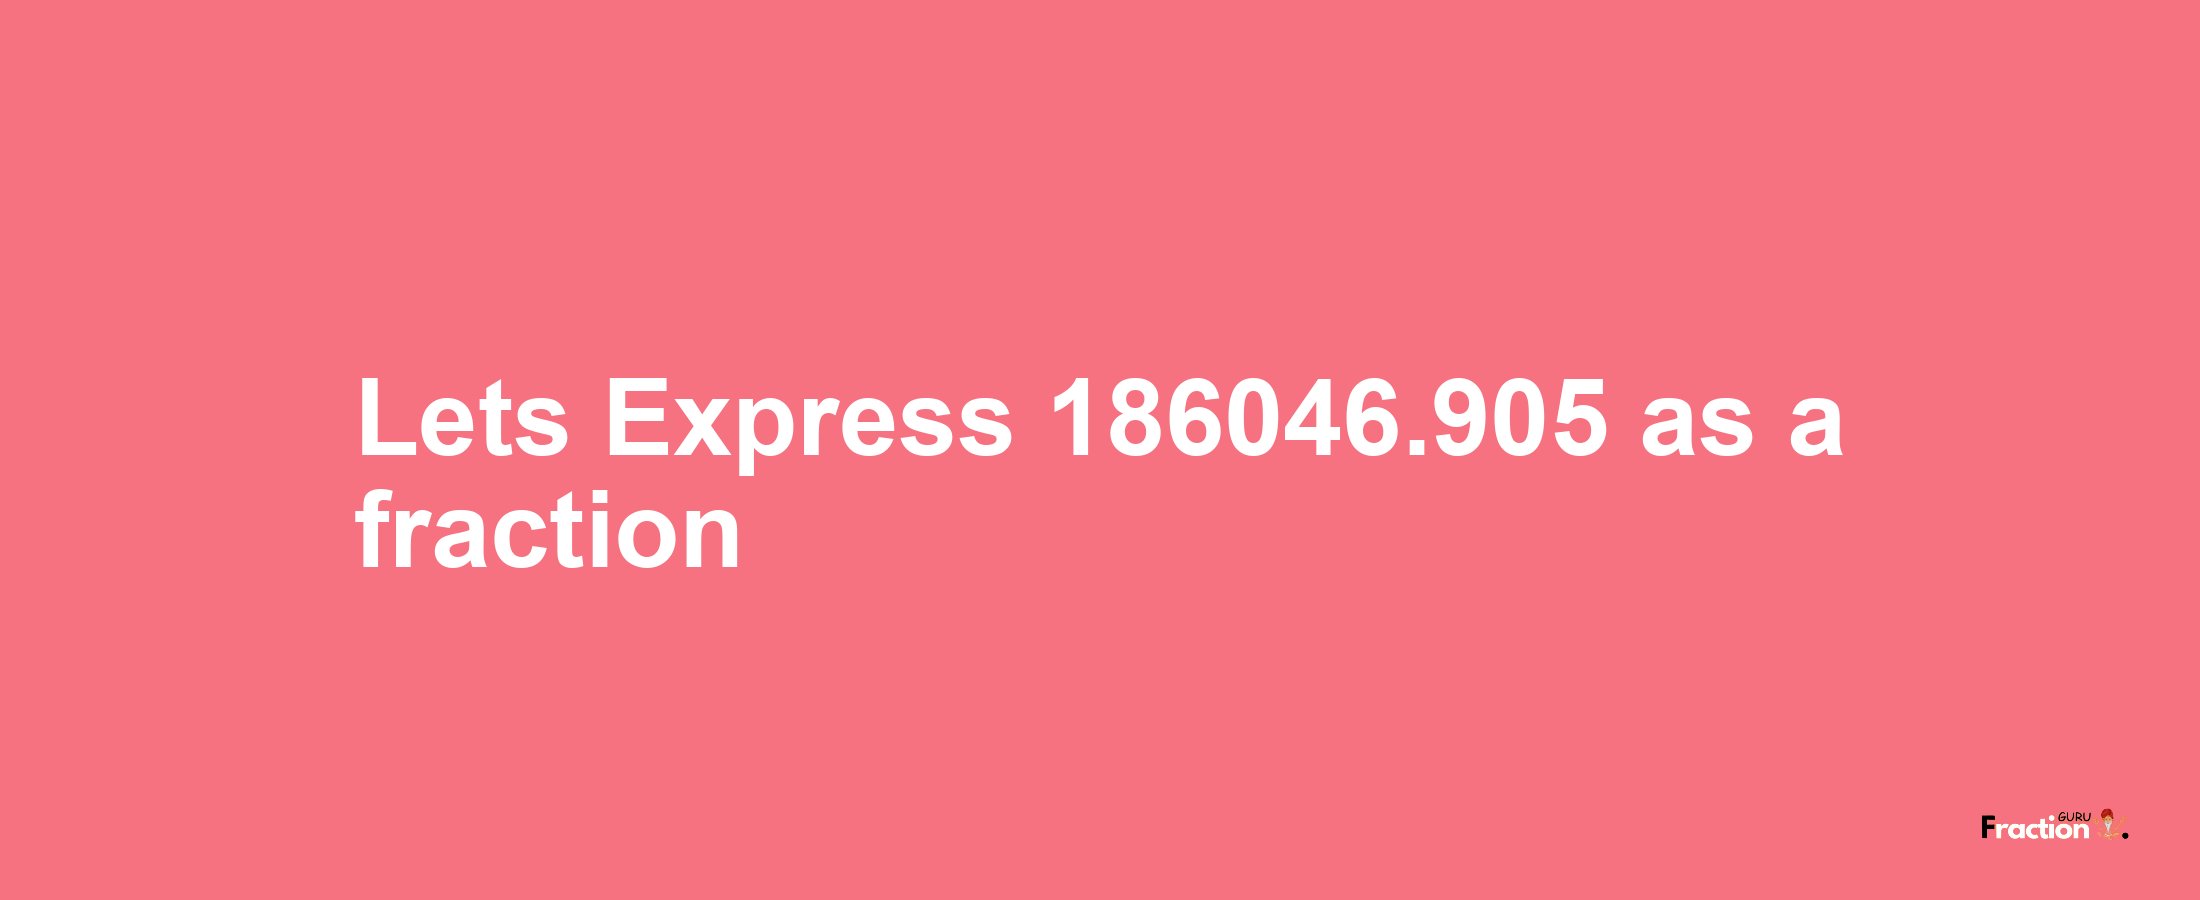 Lets Express 186046.905 as afraction